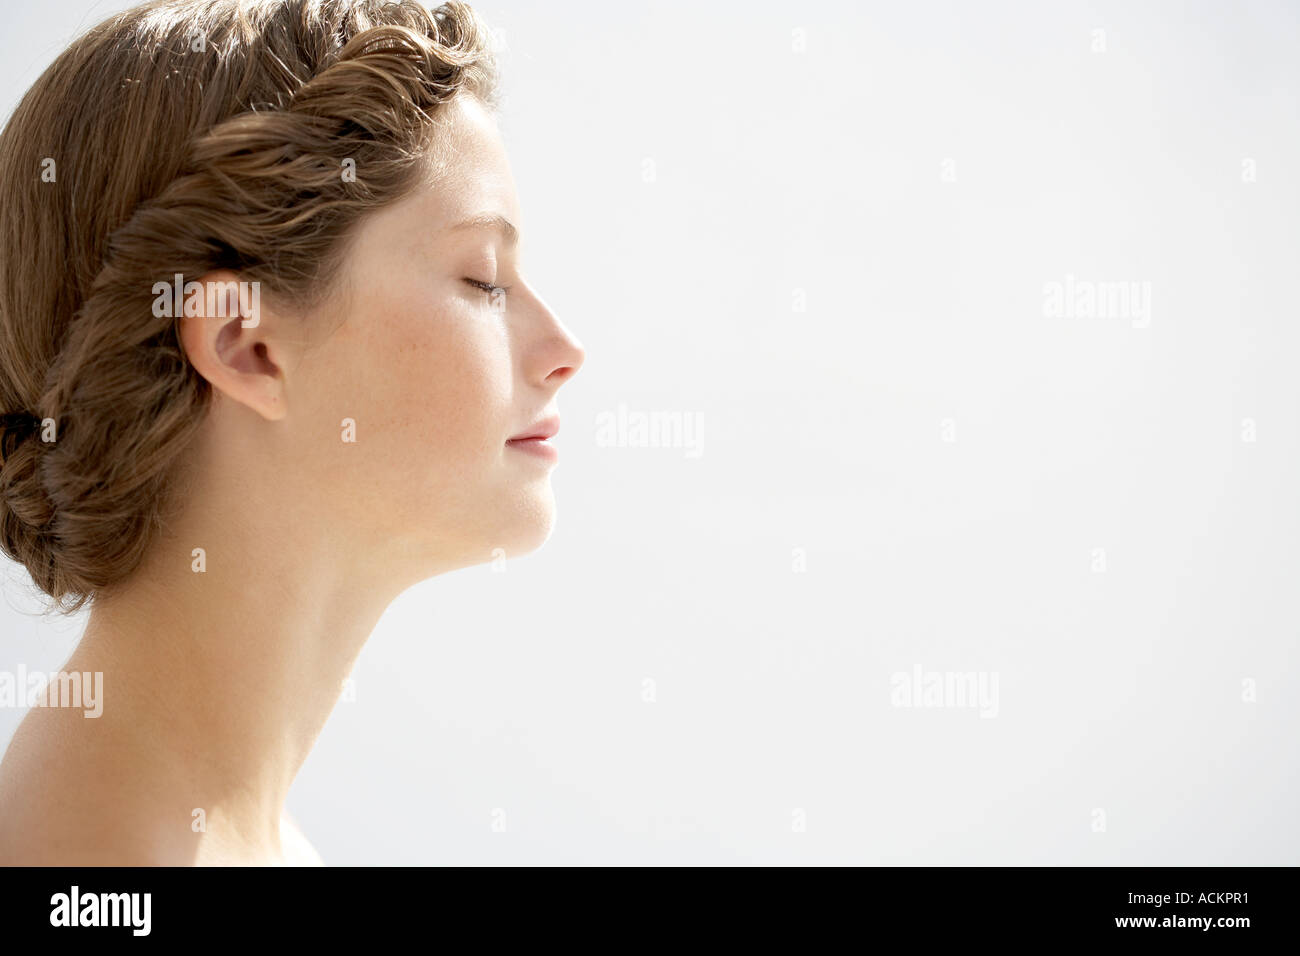 Side view of a young woman s face Stock Photo: 7532528 - Alamy